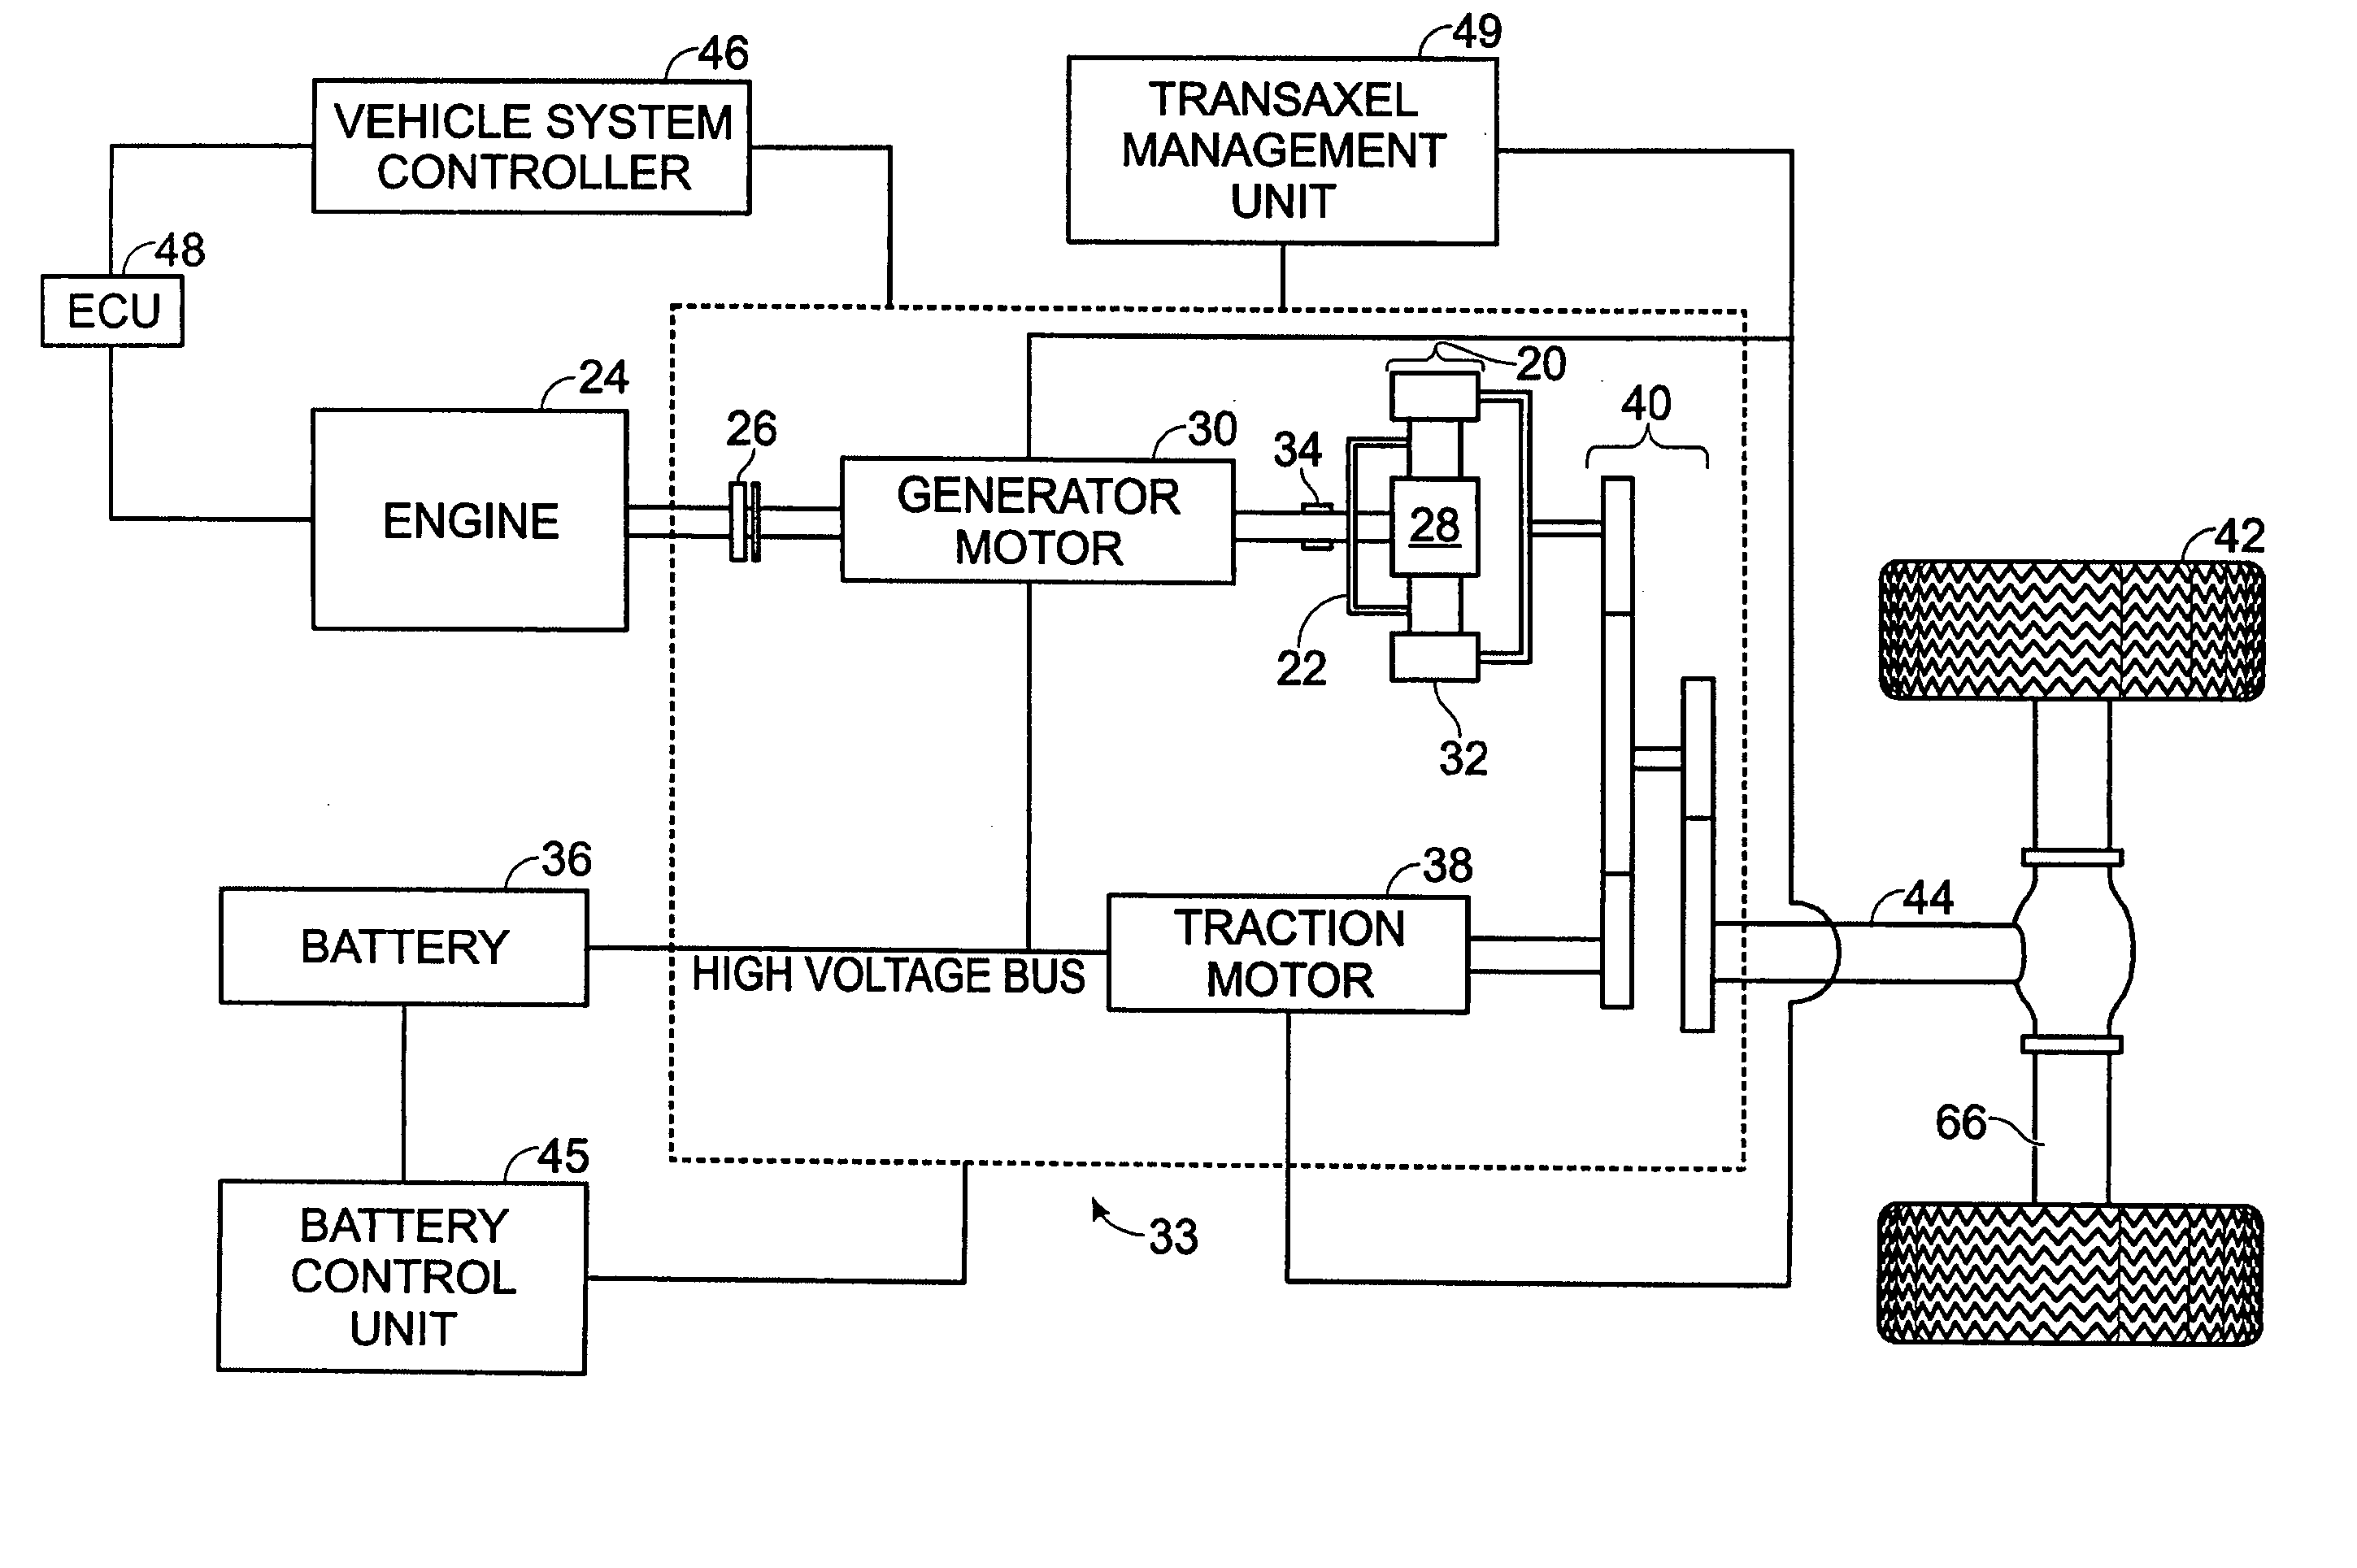 System and method to control engine during de-sulphurization operation in a hybrid vehicle